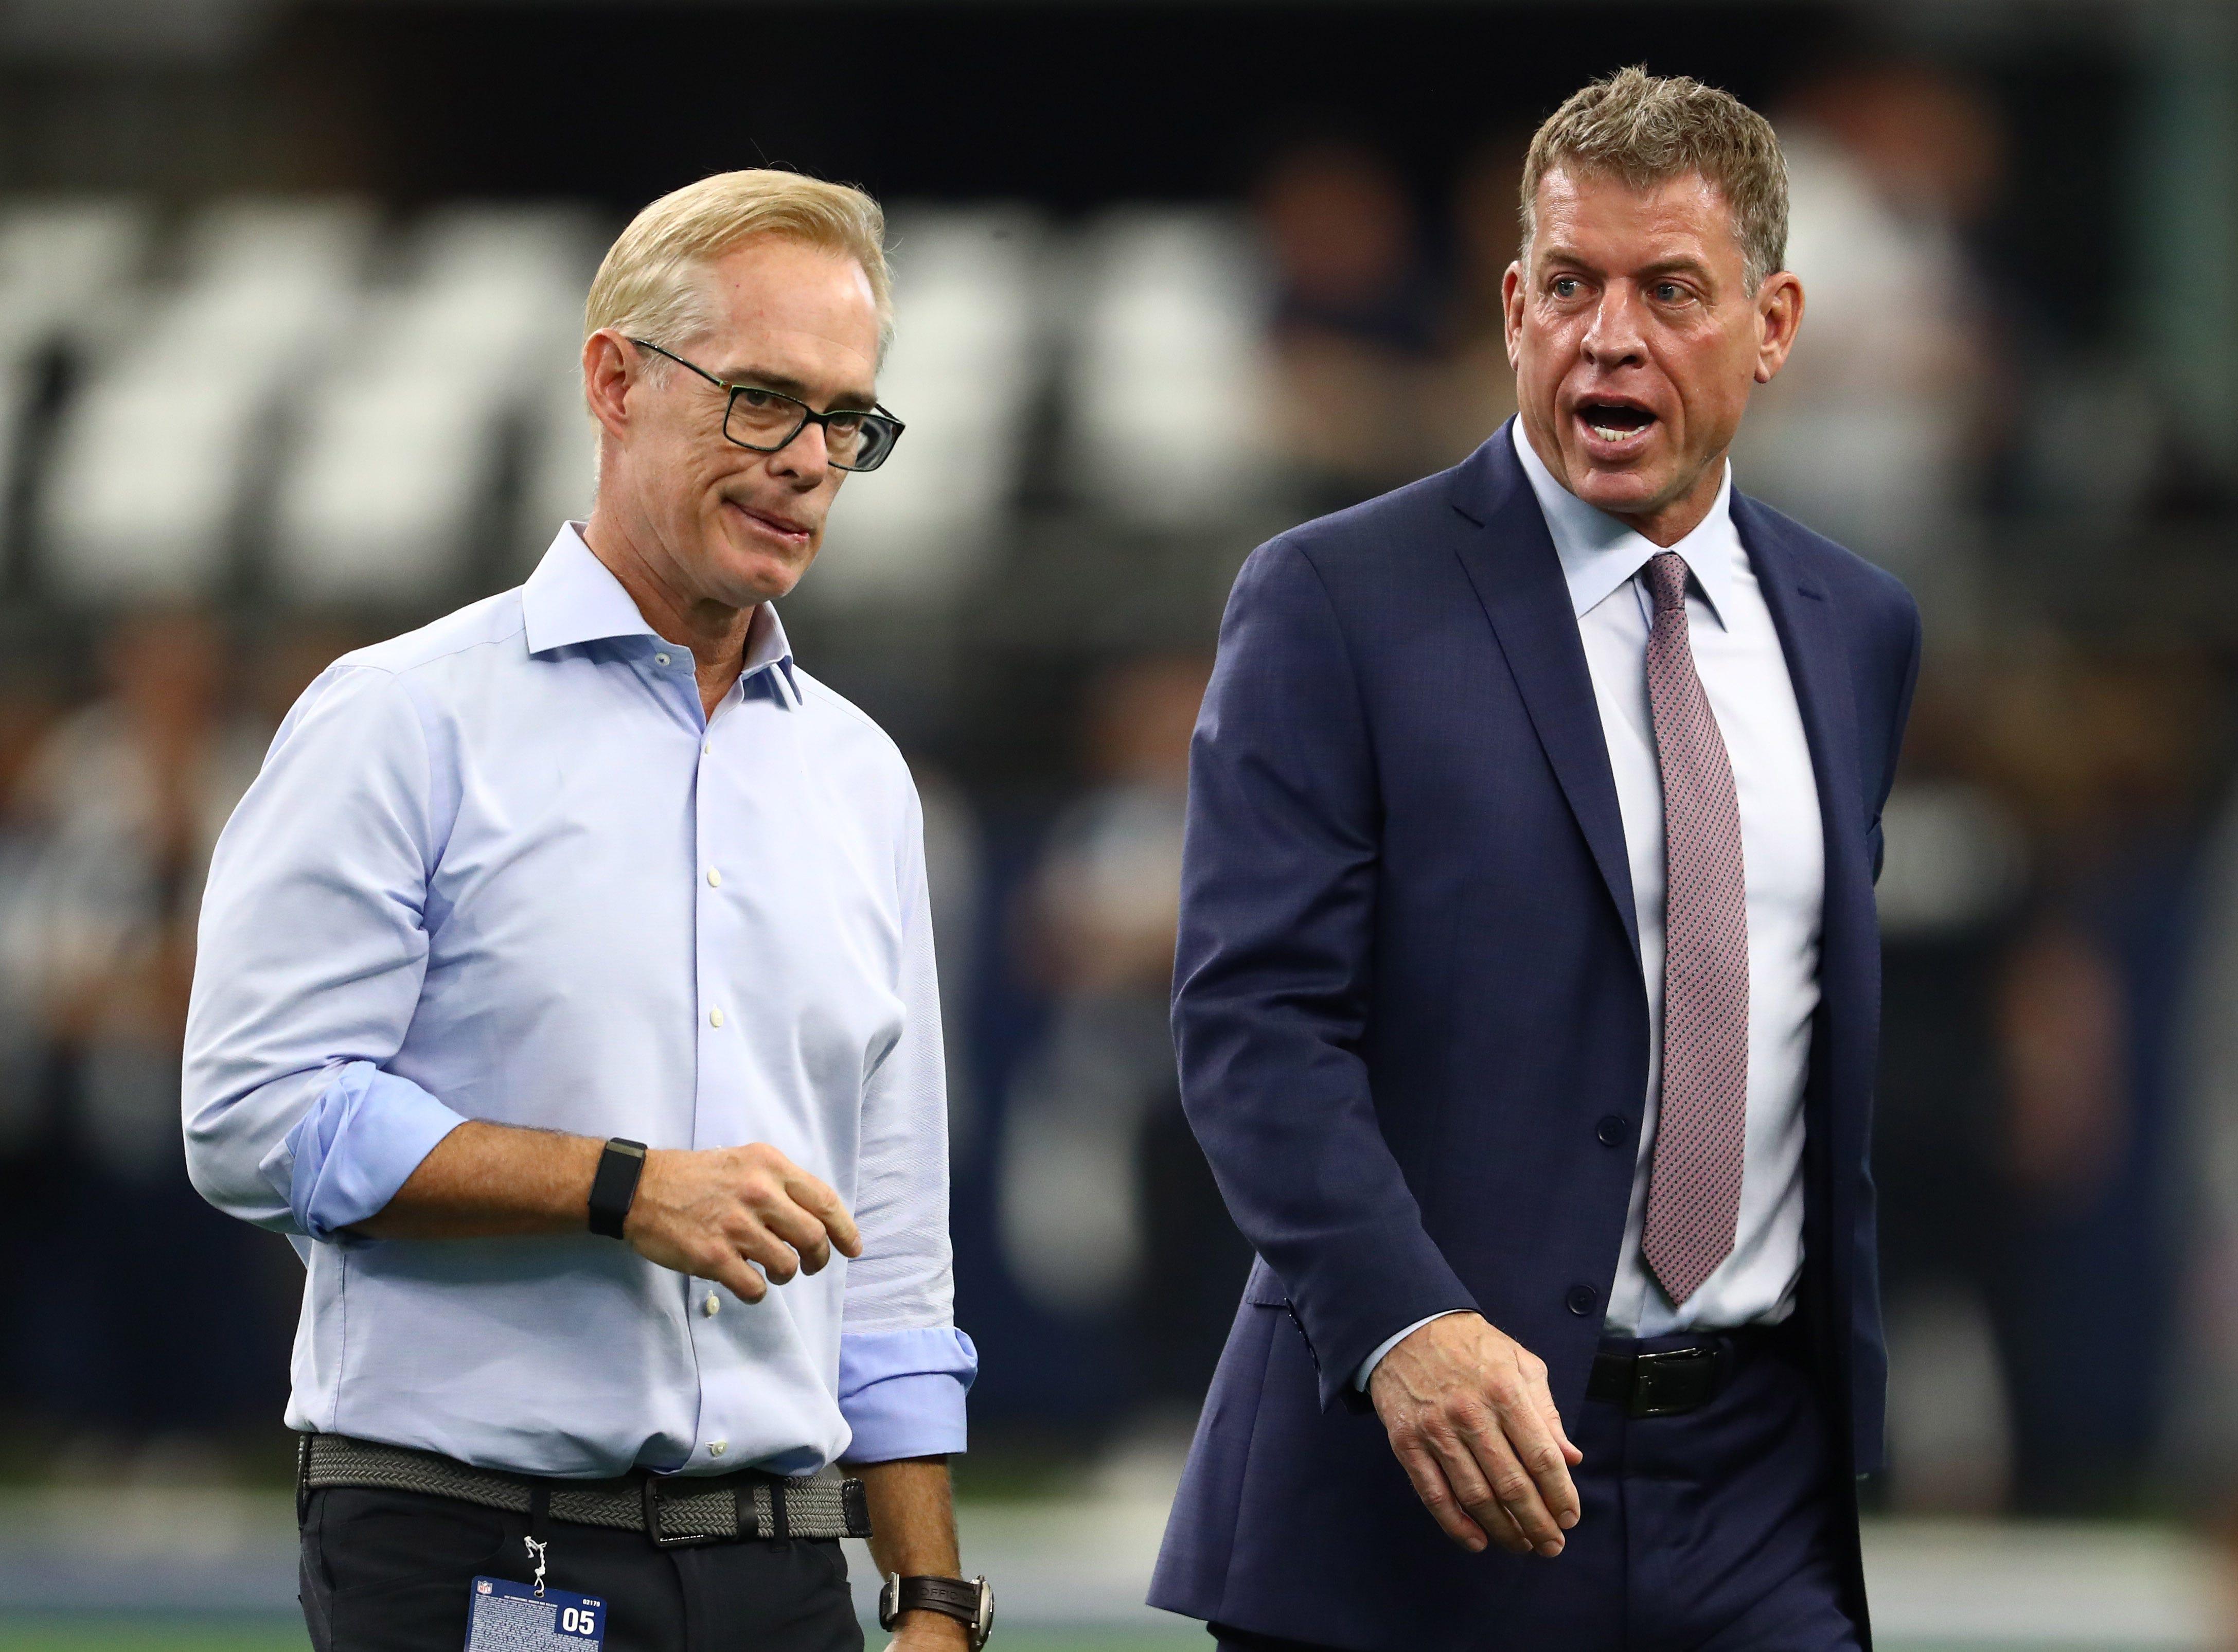 Announcers Joe Buck and Troy Aikman on the field prior to the game with the Dallas Cowboys playing against the Green Bay Packers at AT&T Stadium.